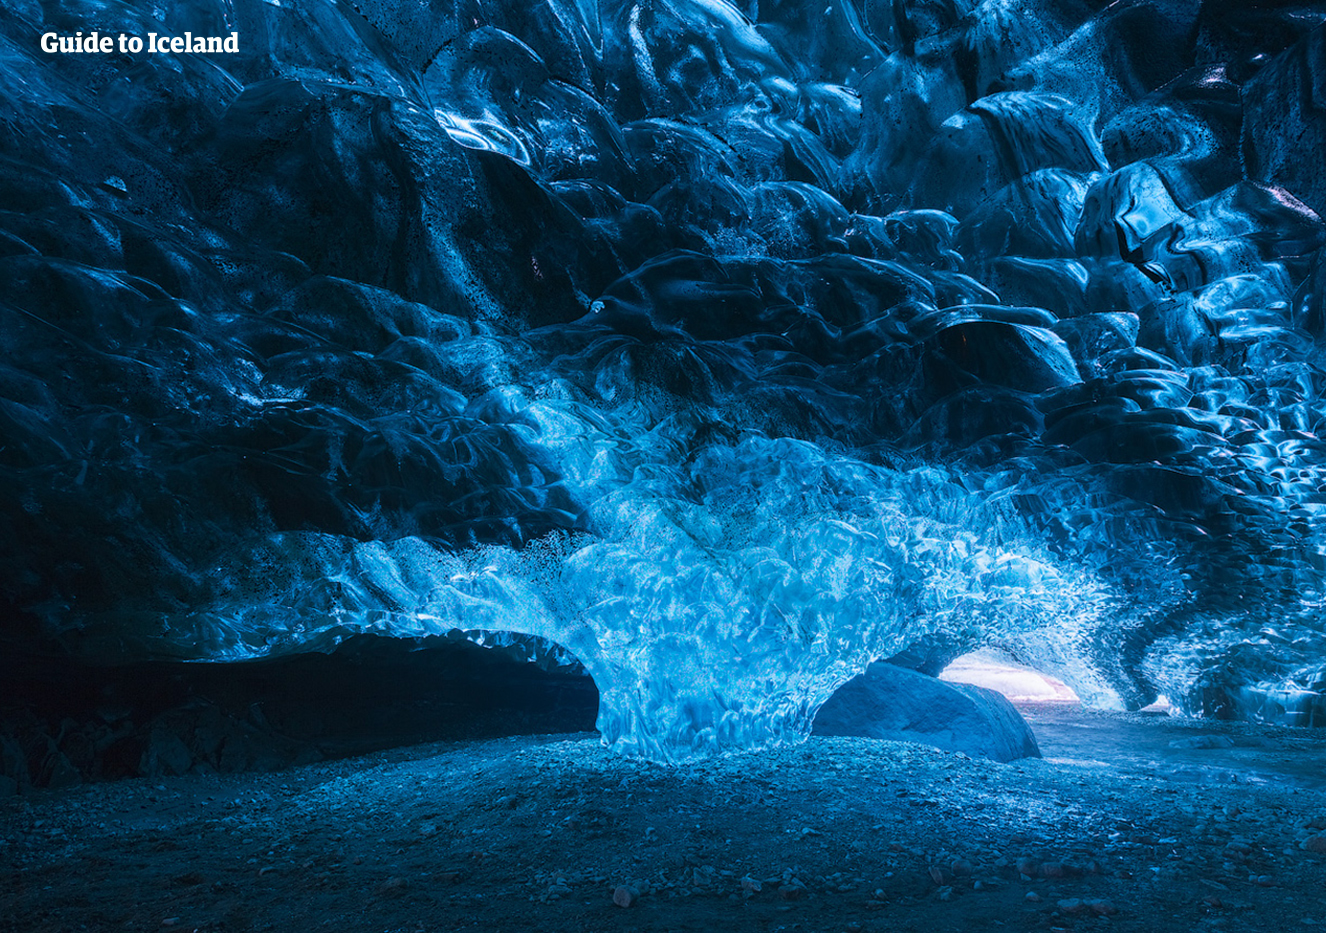 Fantastic shades of blue at an authentic ice cave in Vatnajökull National Park